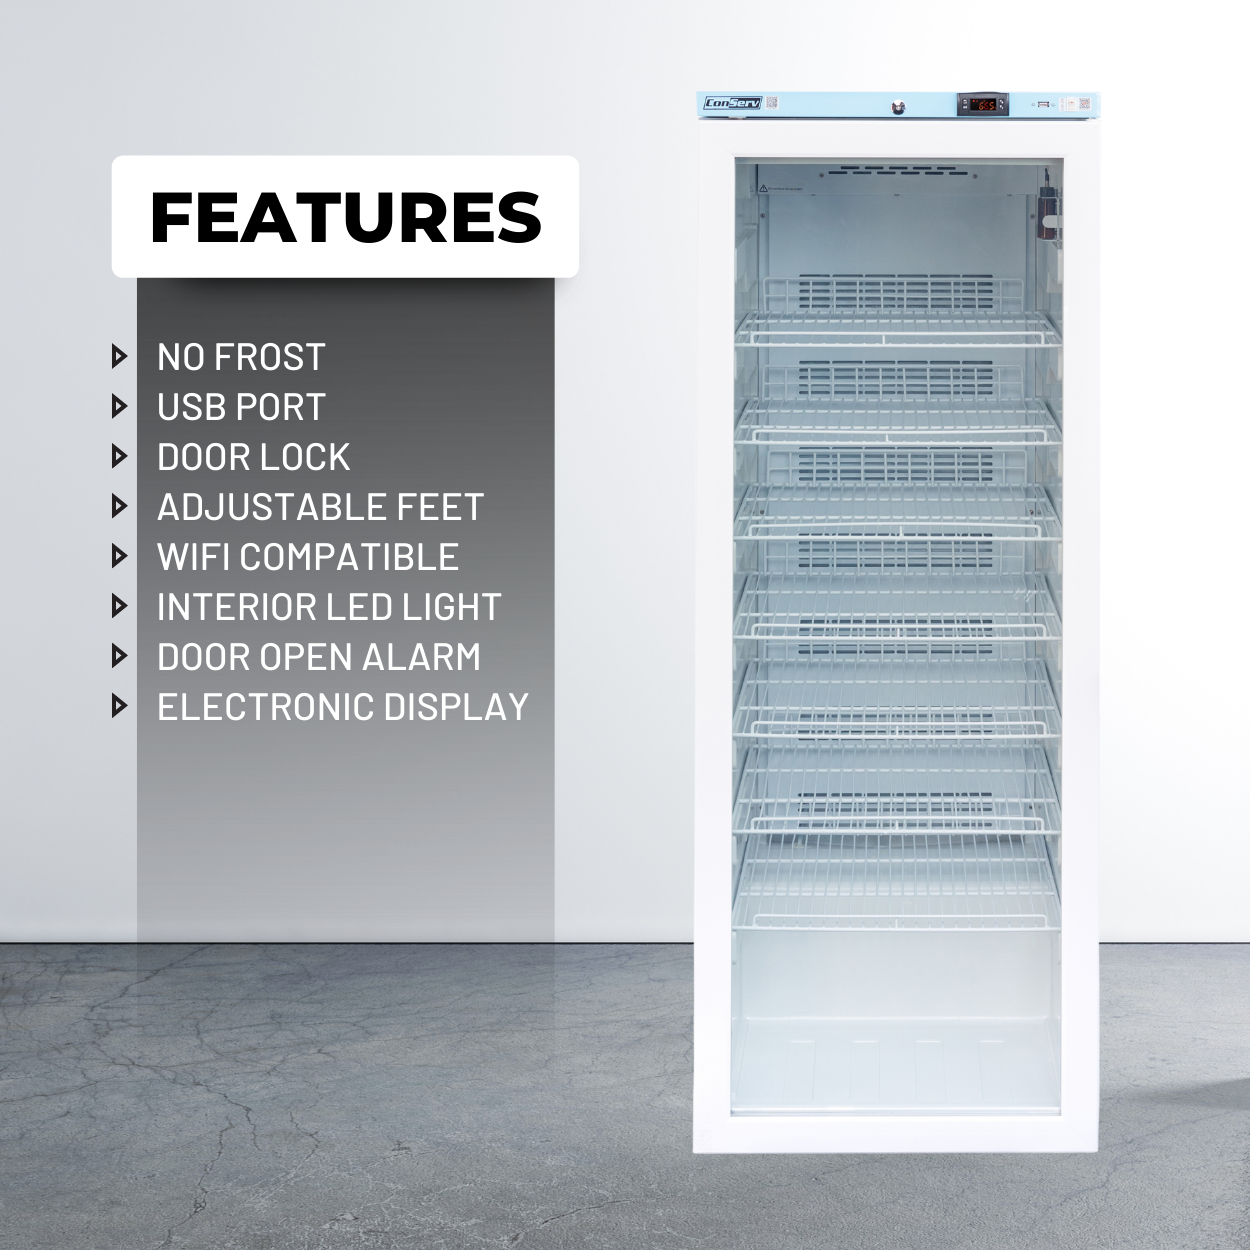 12.7 cu.ft Frost Free Pharmaceutical Refrigerator